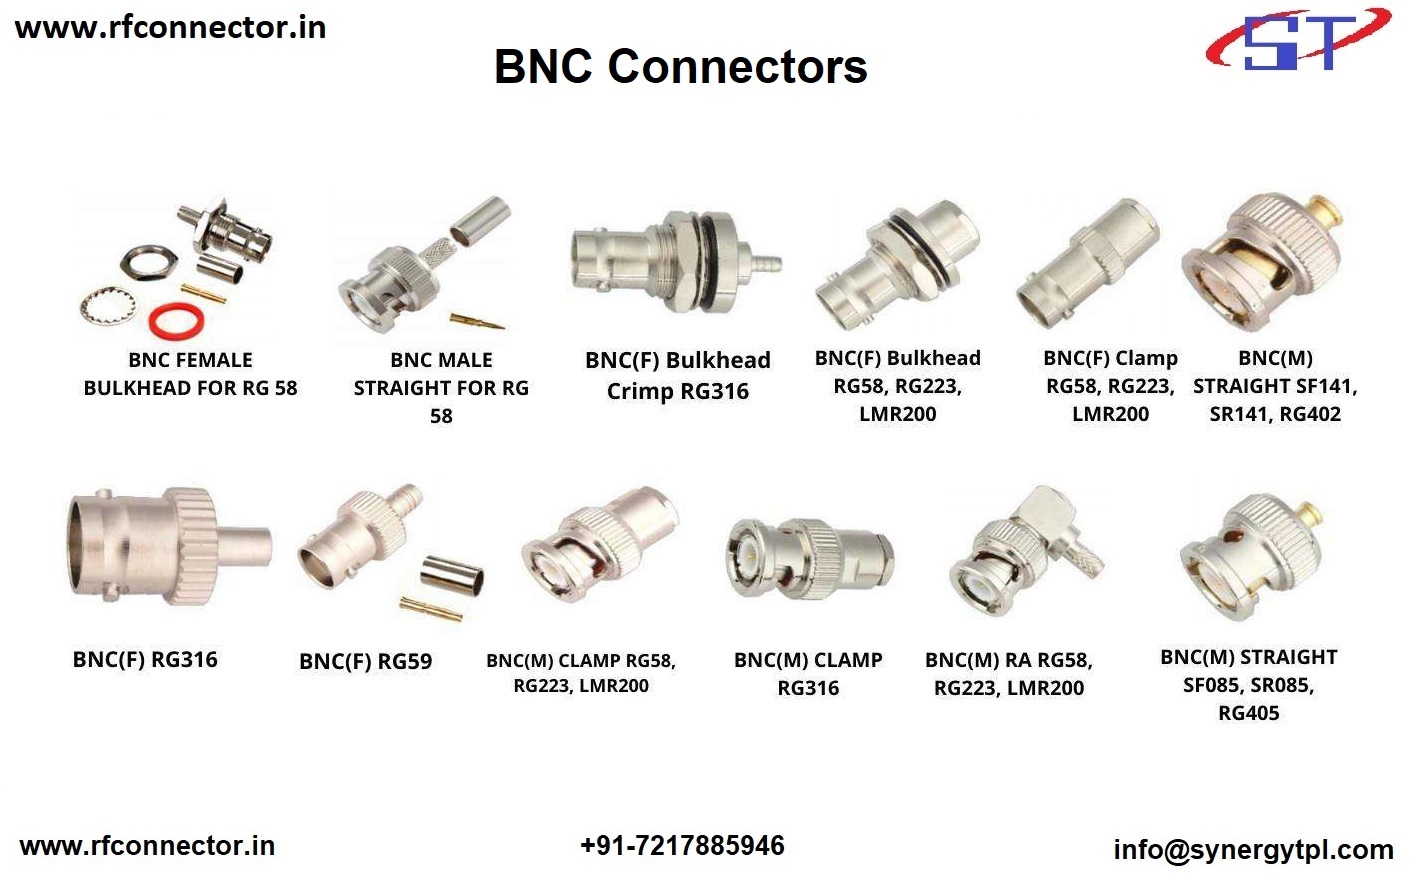 TNC male connector for half inch LDF cable